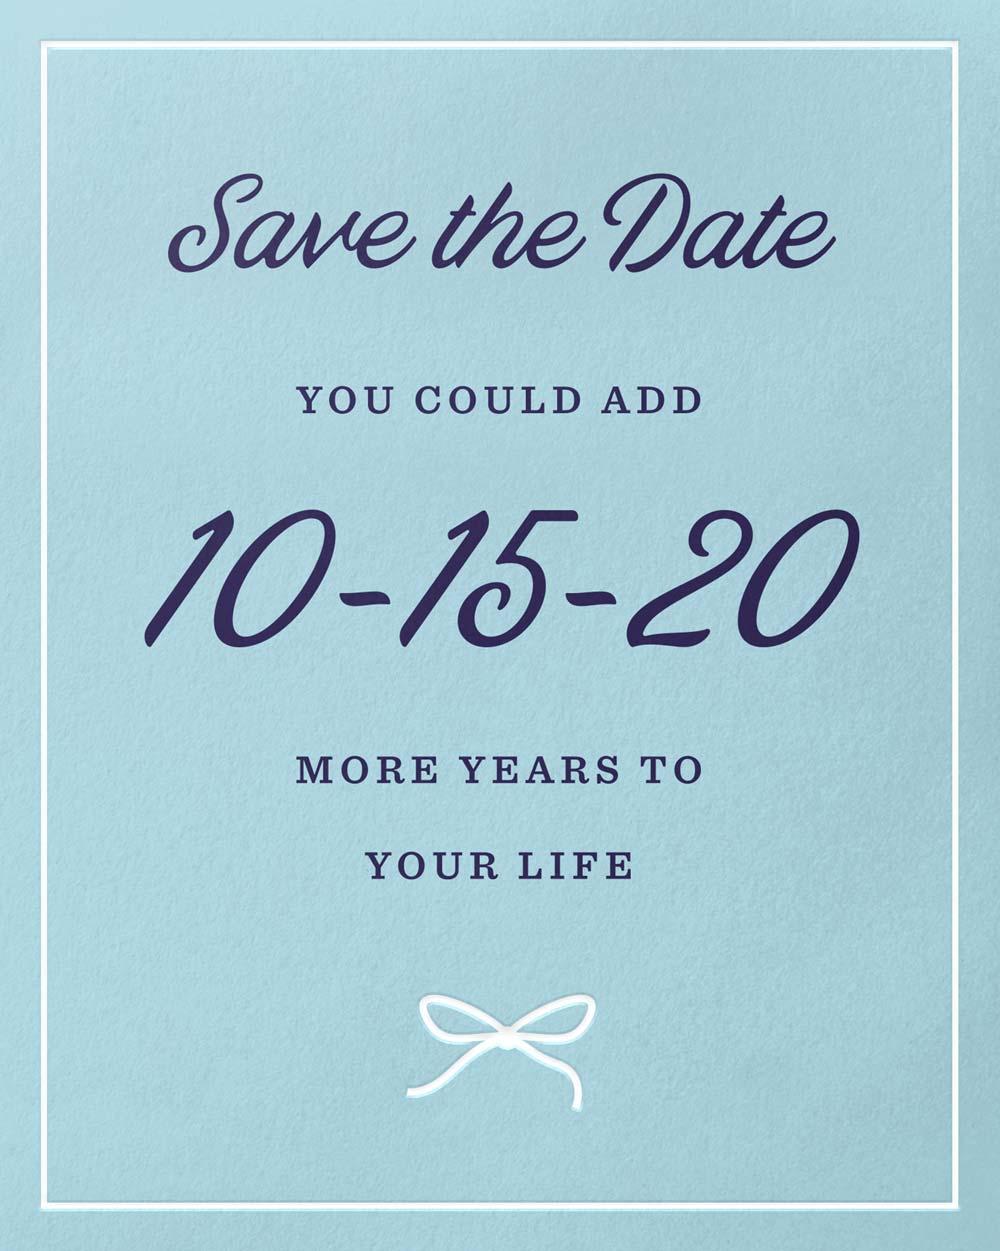 Save the Date. You could add 10-15-20 more years to your life.